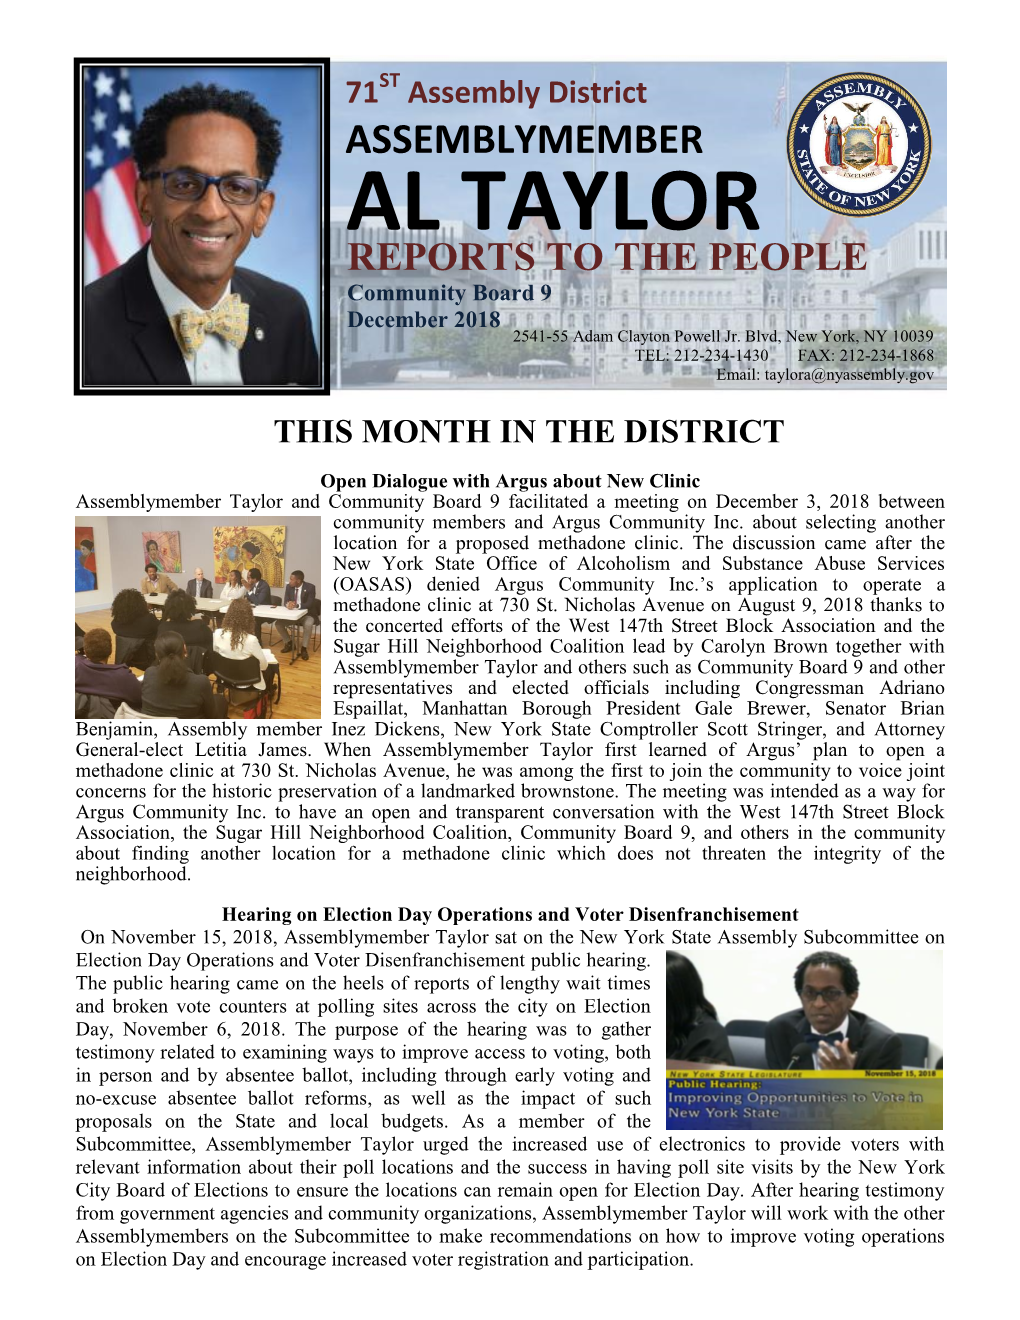 AL TAYLOR REPORTS to the PEOPLE Community Board 9